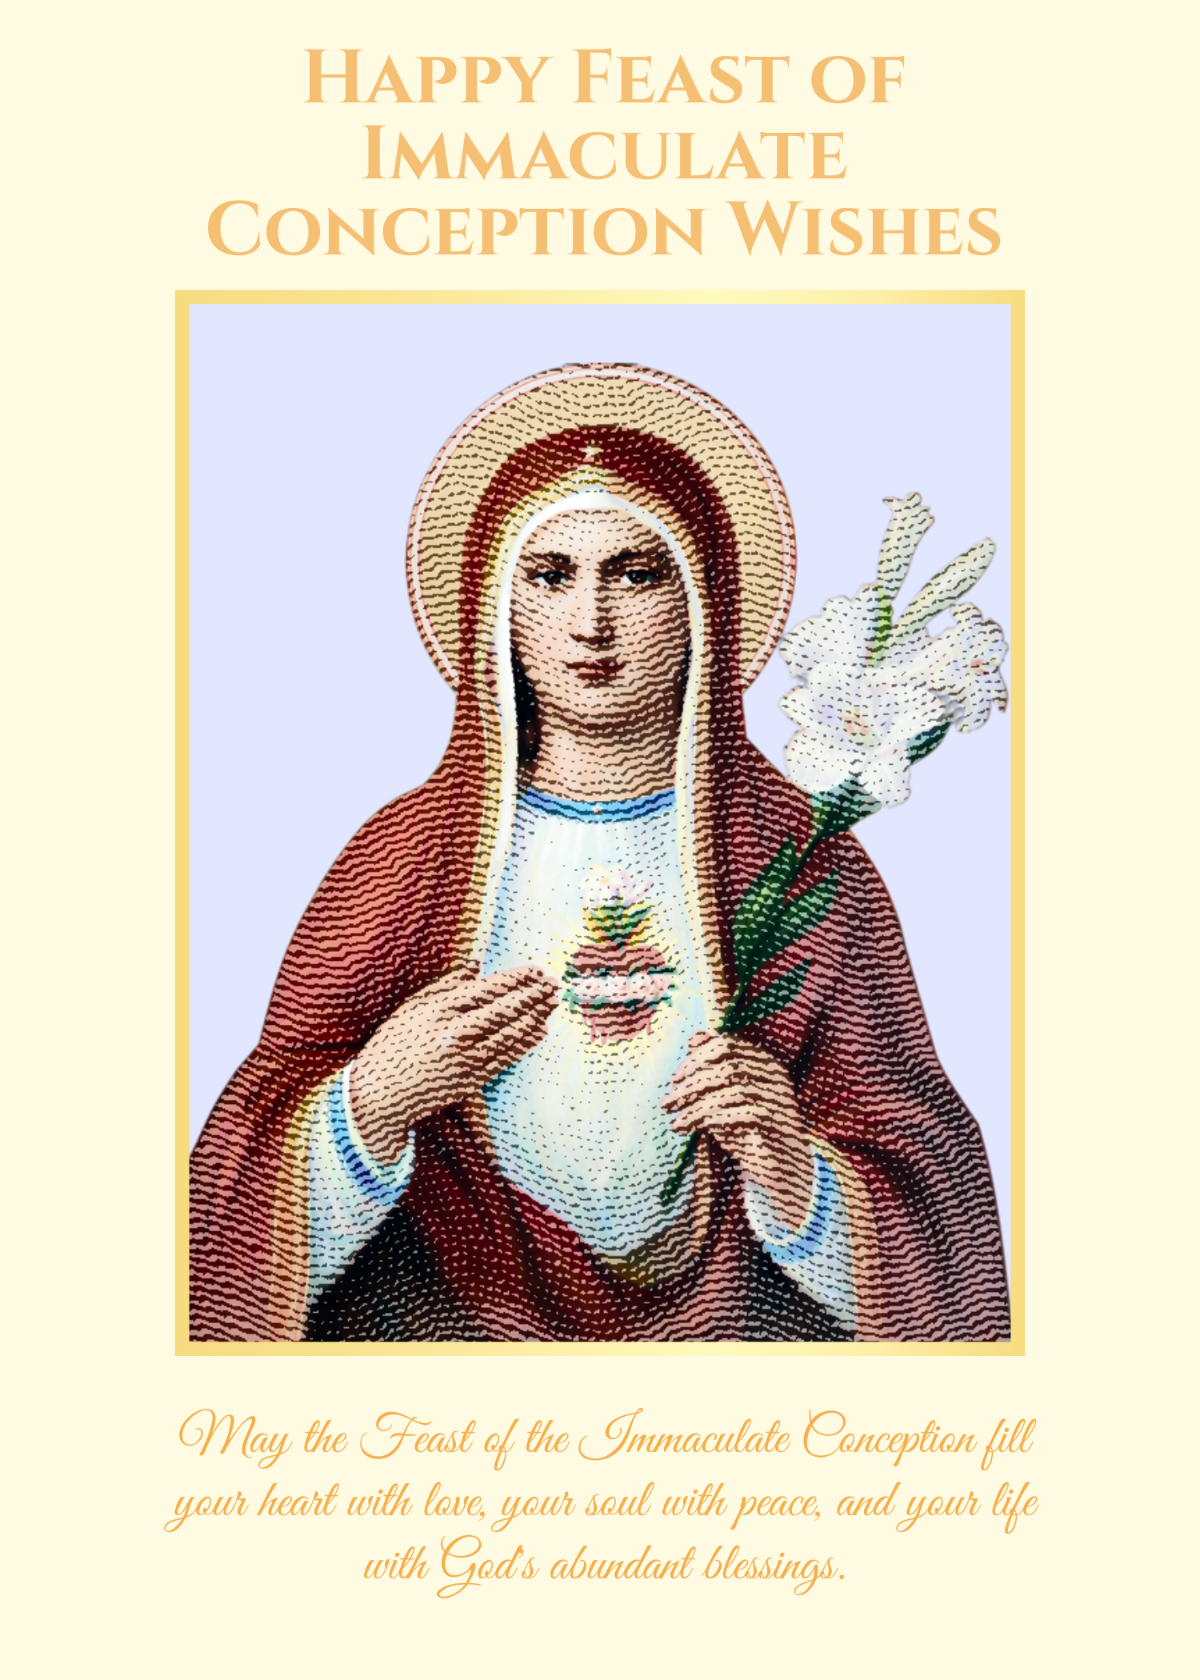 Happy Feast of Immaculate Conception Wishes